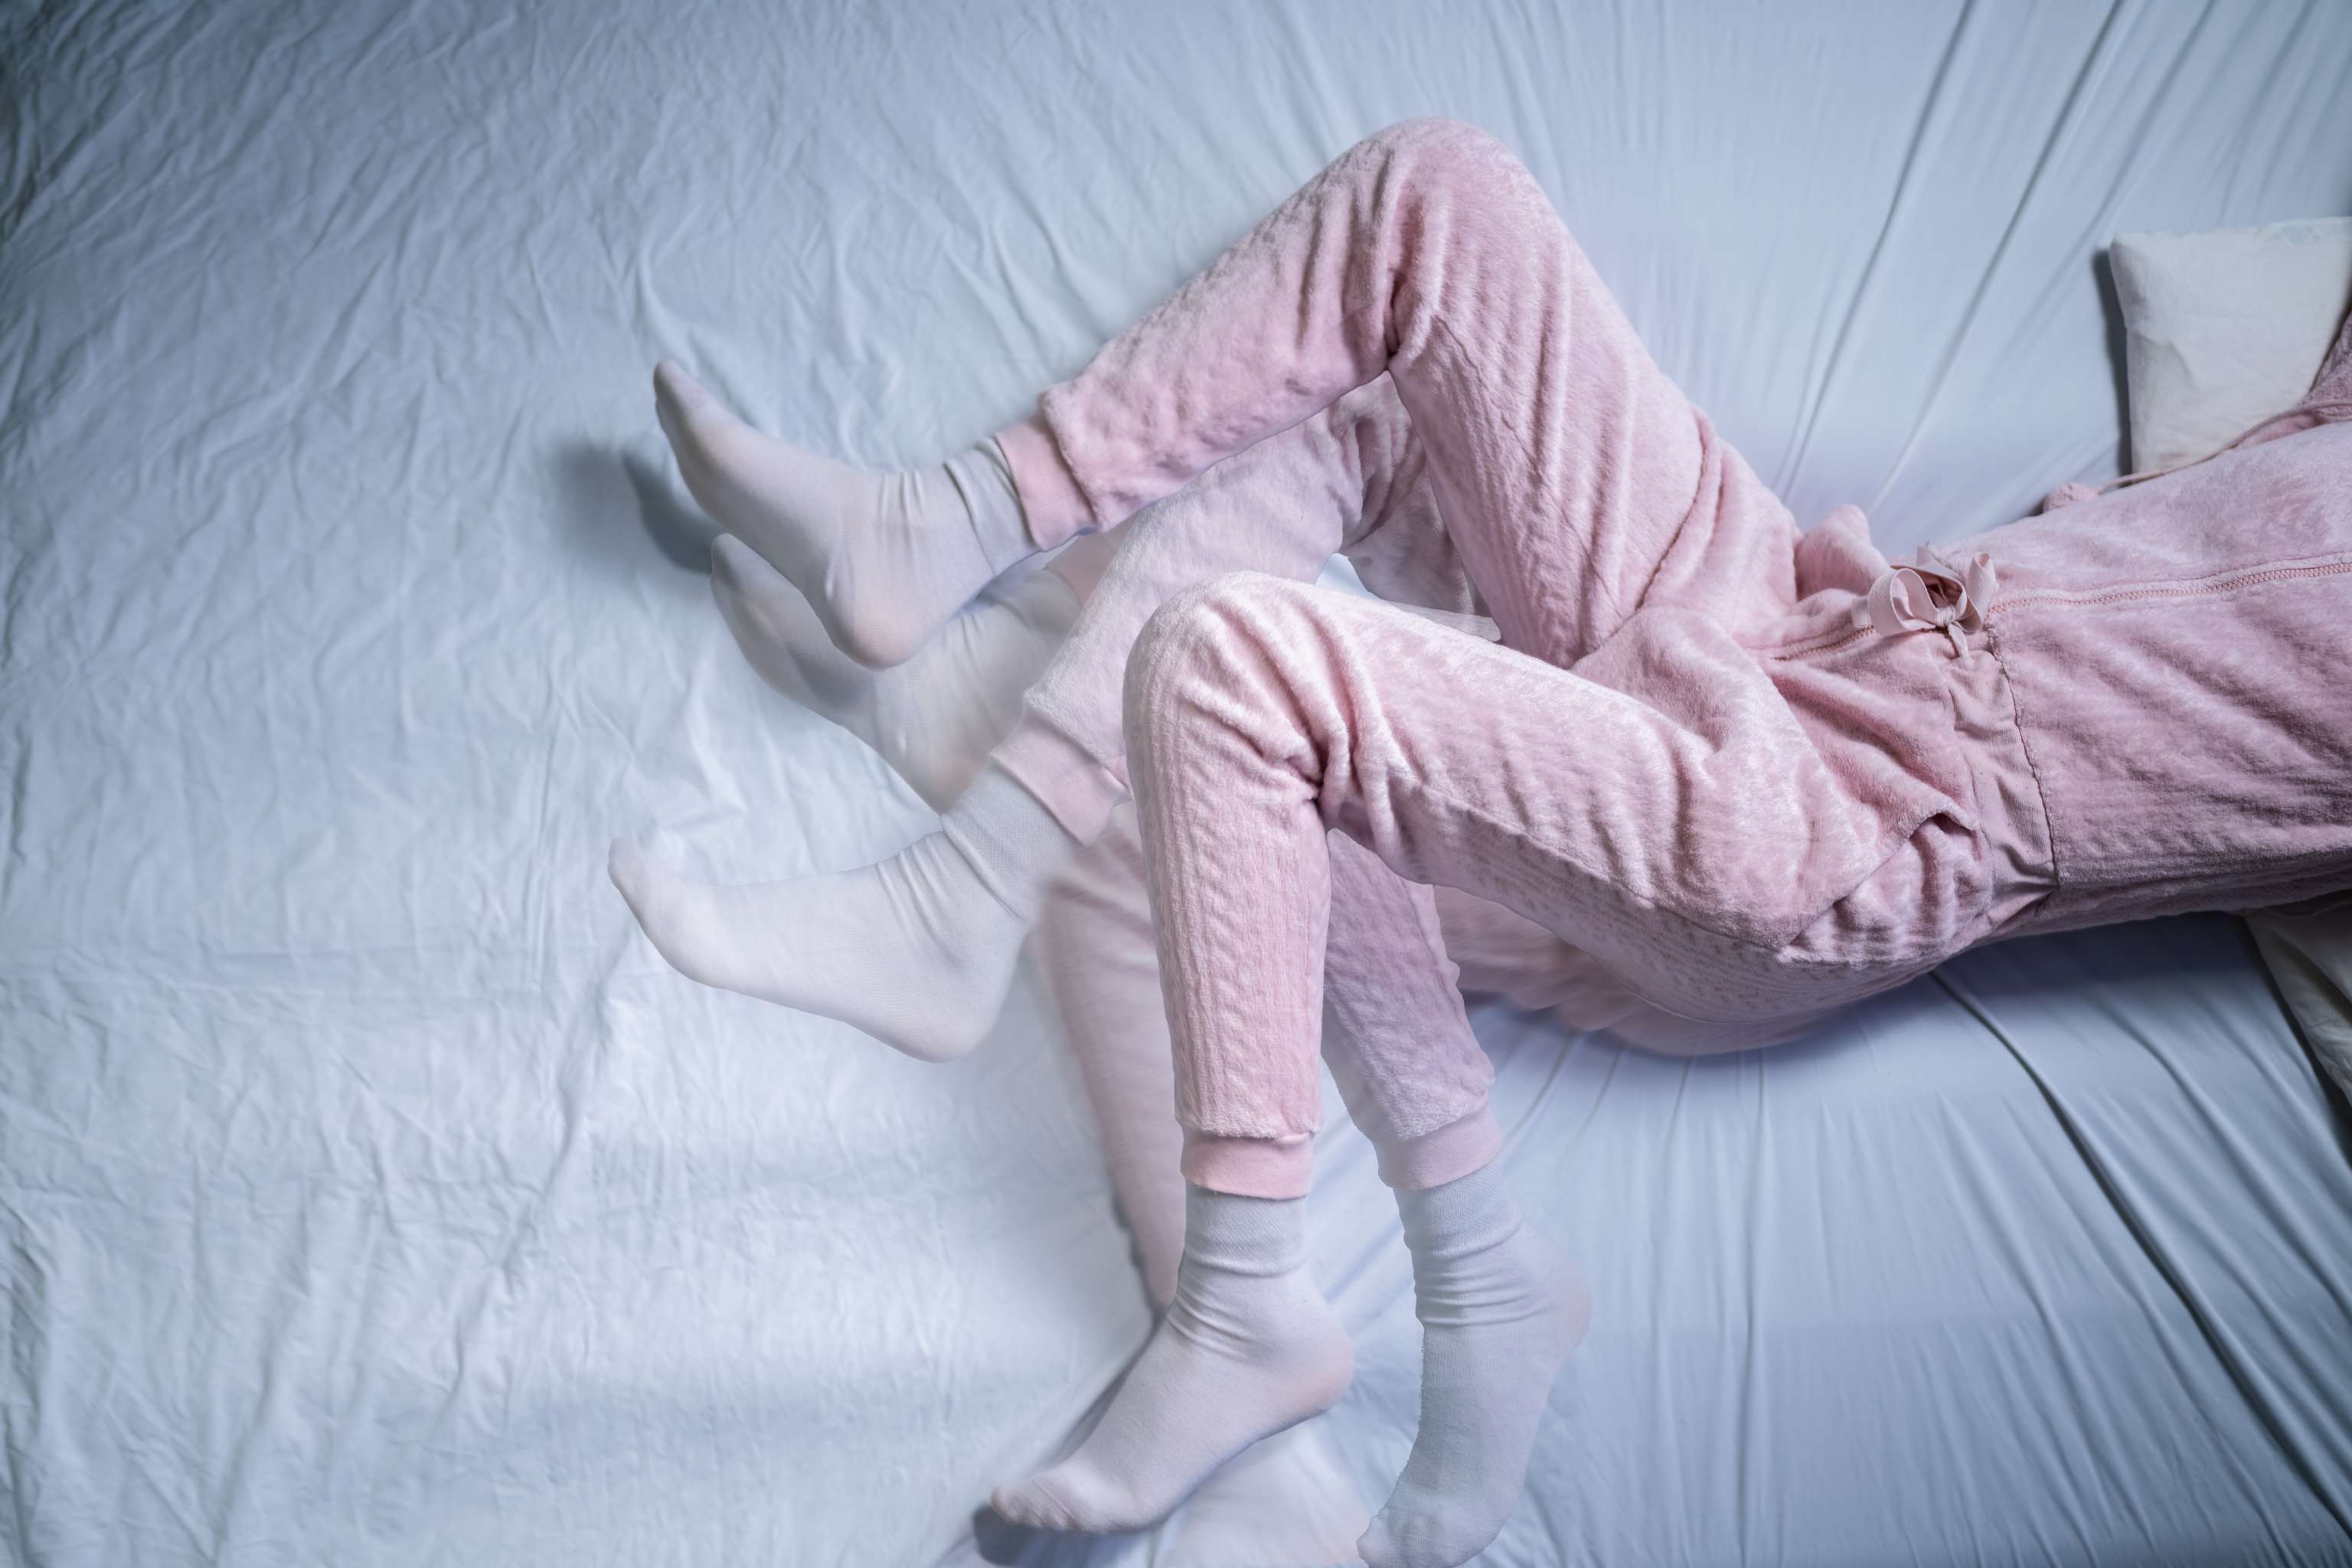 New therapy recommendations for restless legs syndrome